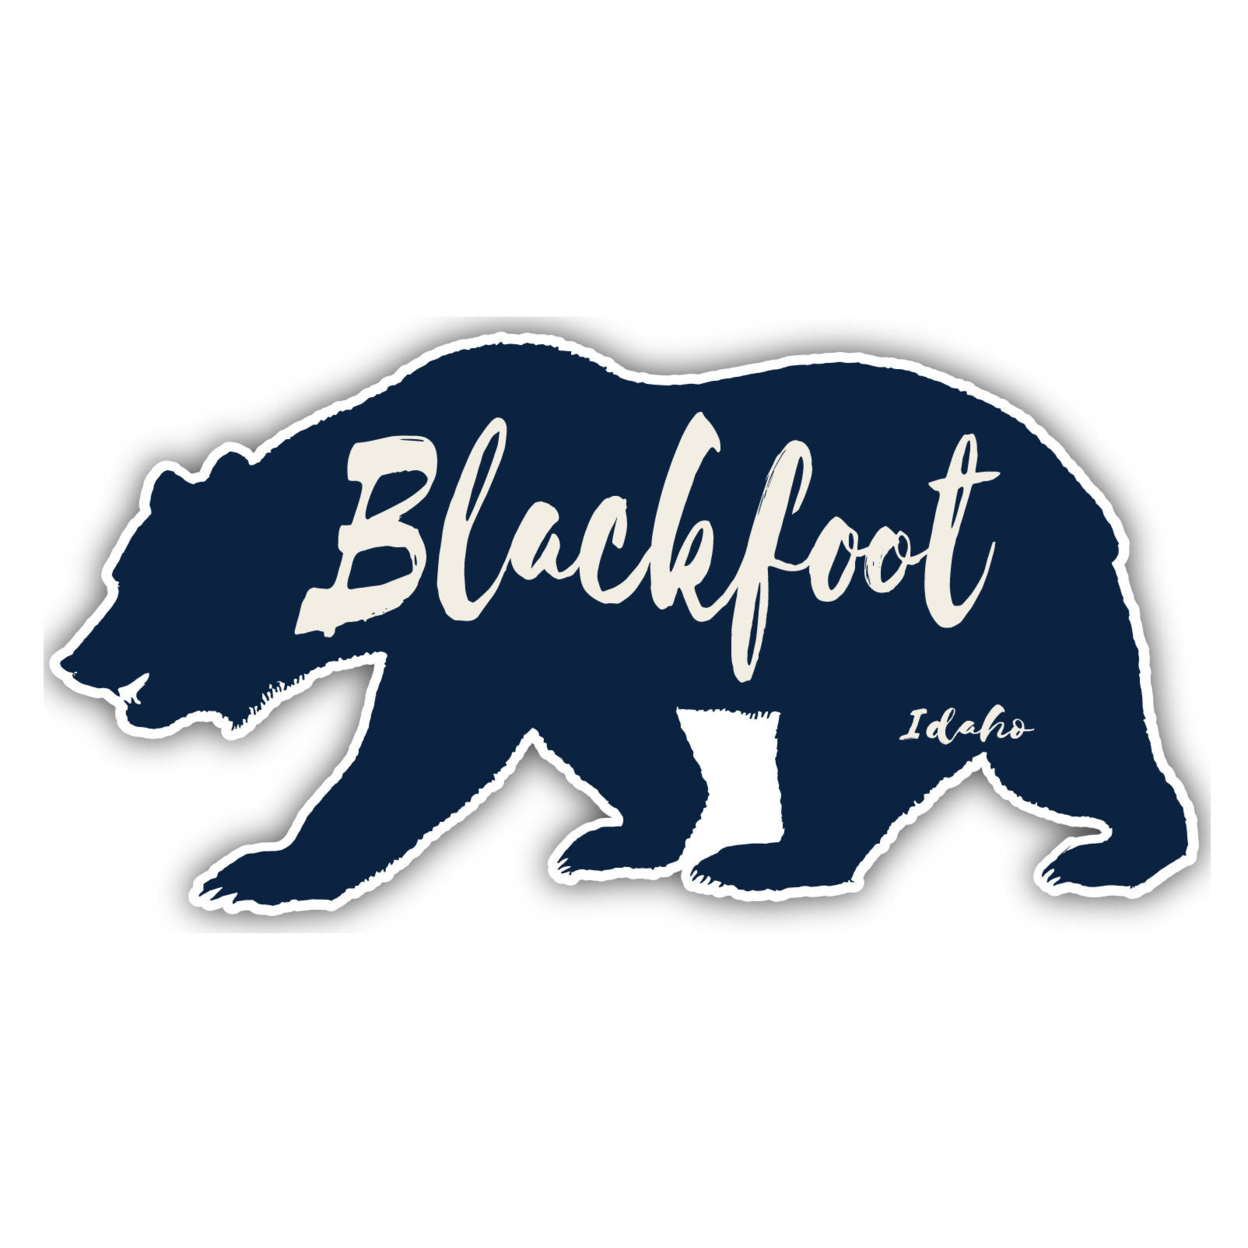 Blackfoot Idaho Souvenir Decorative Stickers (Choose Theme And Size) - 4-Pack, 2-Inch, Camp Life